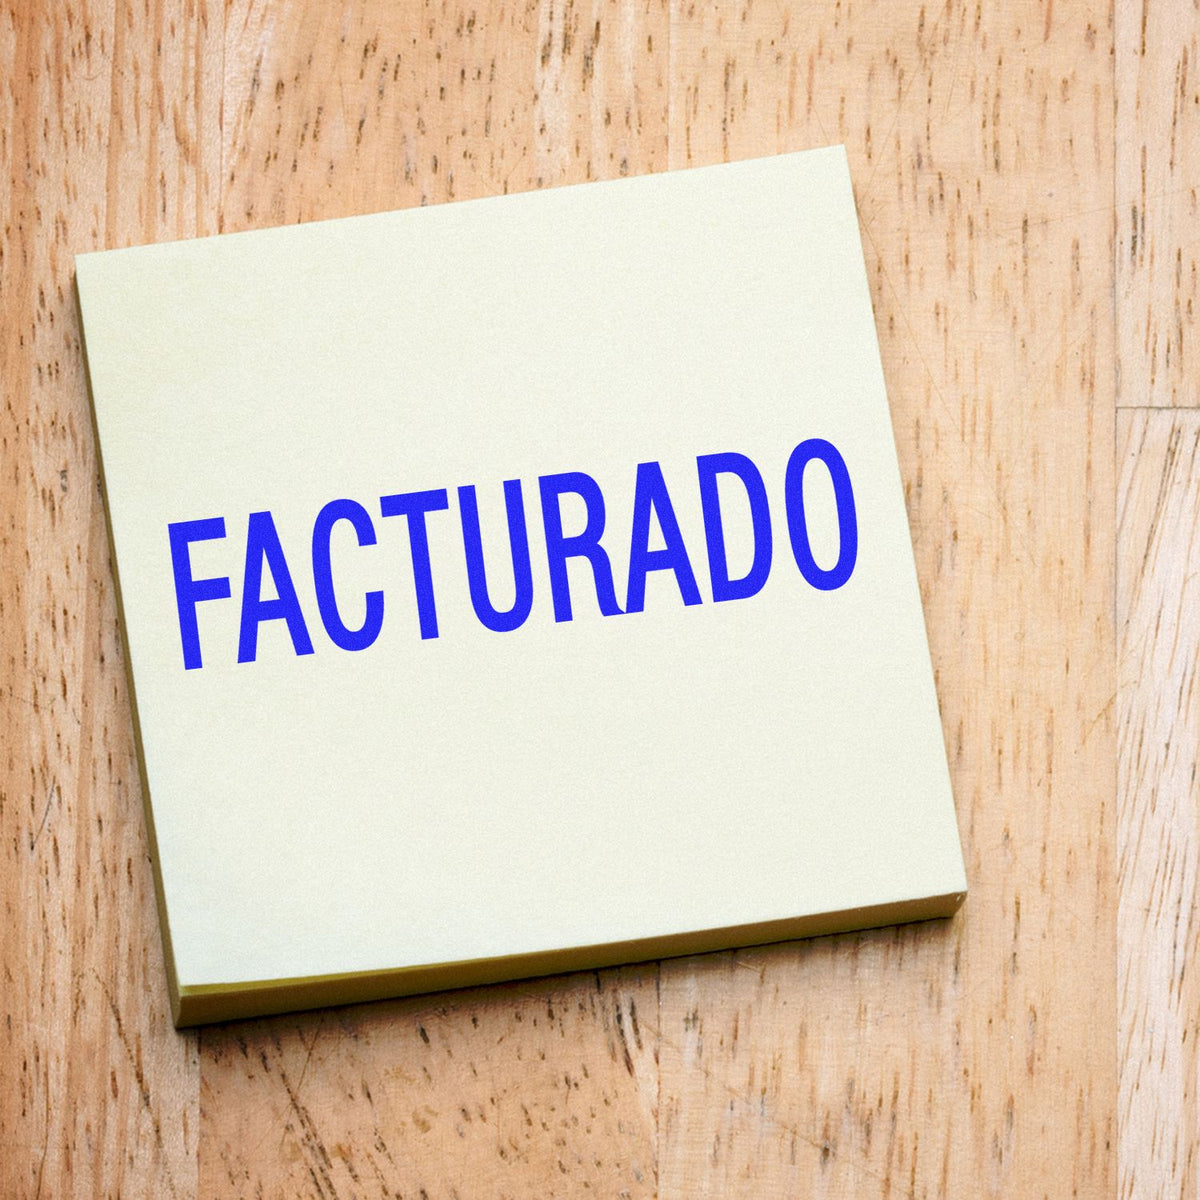 Large Facturado Rubber Stamp In Use Photo